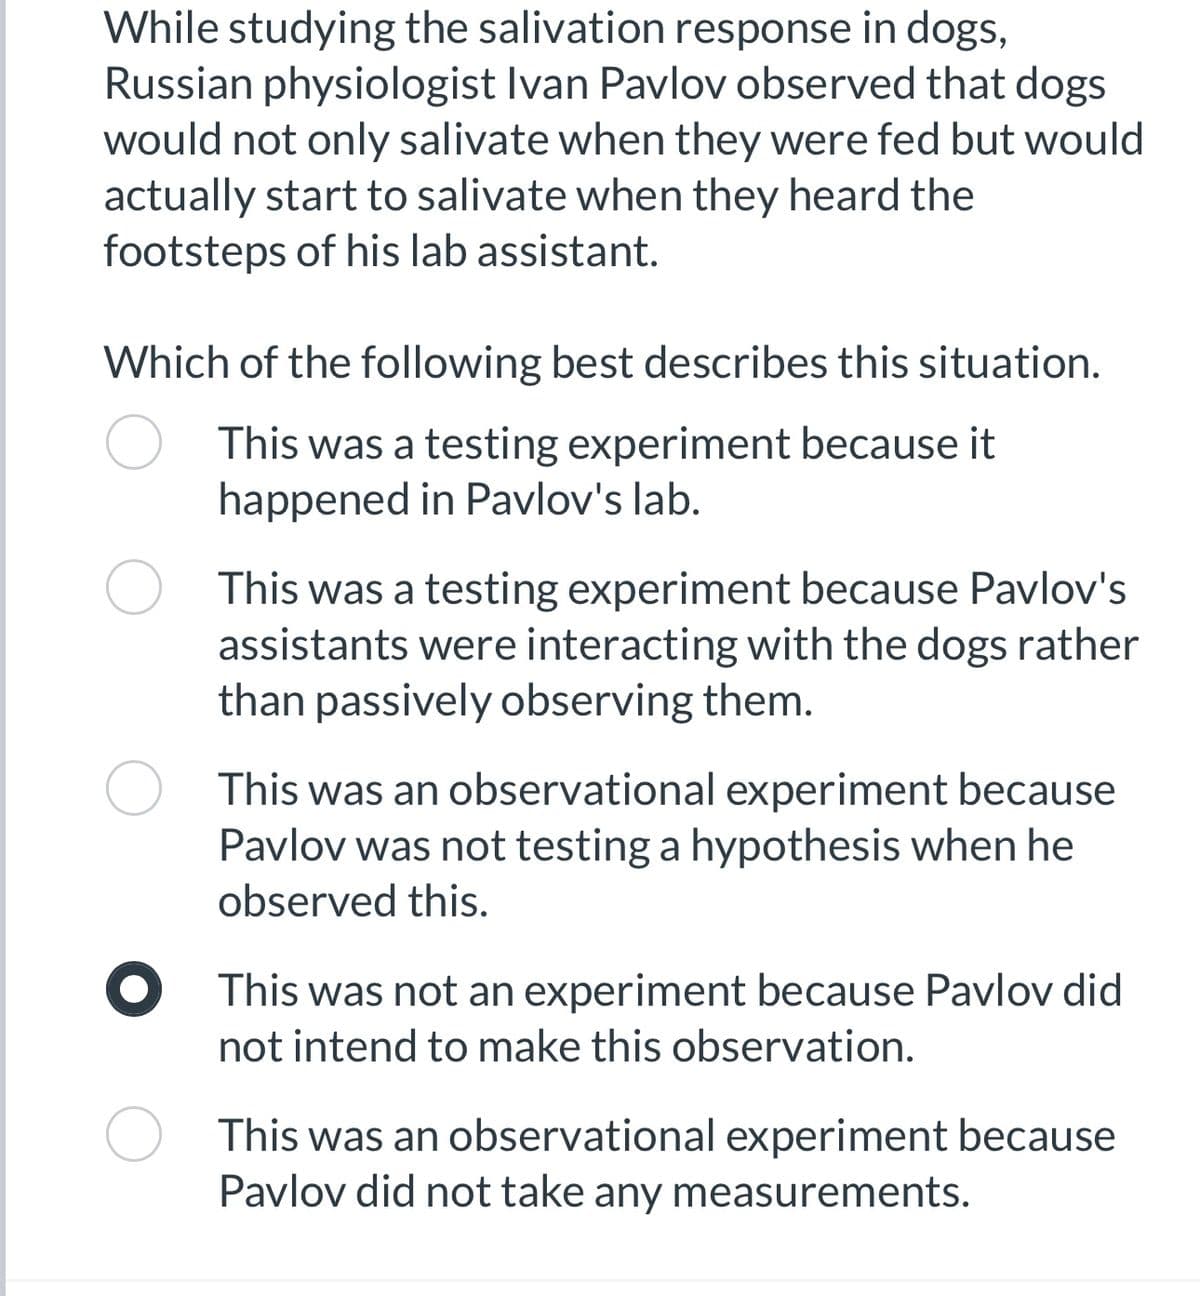 While studying the salivation response in dogs,
Russian physiologist Ivan Pavlov observed that dogs
would not only salivate when they were fed but would
actually start to salivate when they heard the
footsteps of his lab assistant.
Which of the following best describes this situation.
This was a testing experiment because it
happened in Pavlov's lab.
This was a testing experiment because Pavlov's
assistants were interacting with the dogs rather
than passively observing them.
This was an observational experiment because
Pavlov was not testing a hypothesis when he
observed this.
This was not an experiment because Pavlov did
not intend to make this observation.
This was an observational experiment because
Pavlov did not take any measurements.